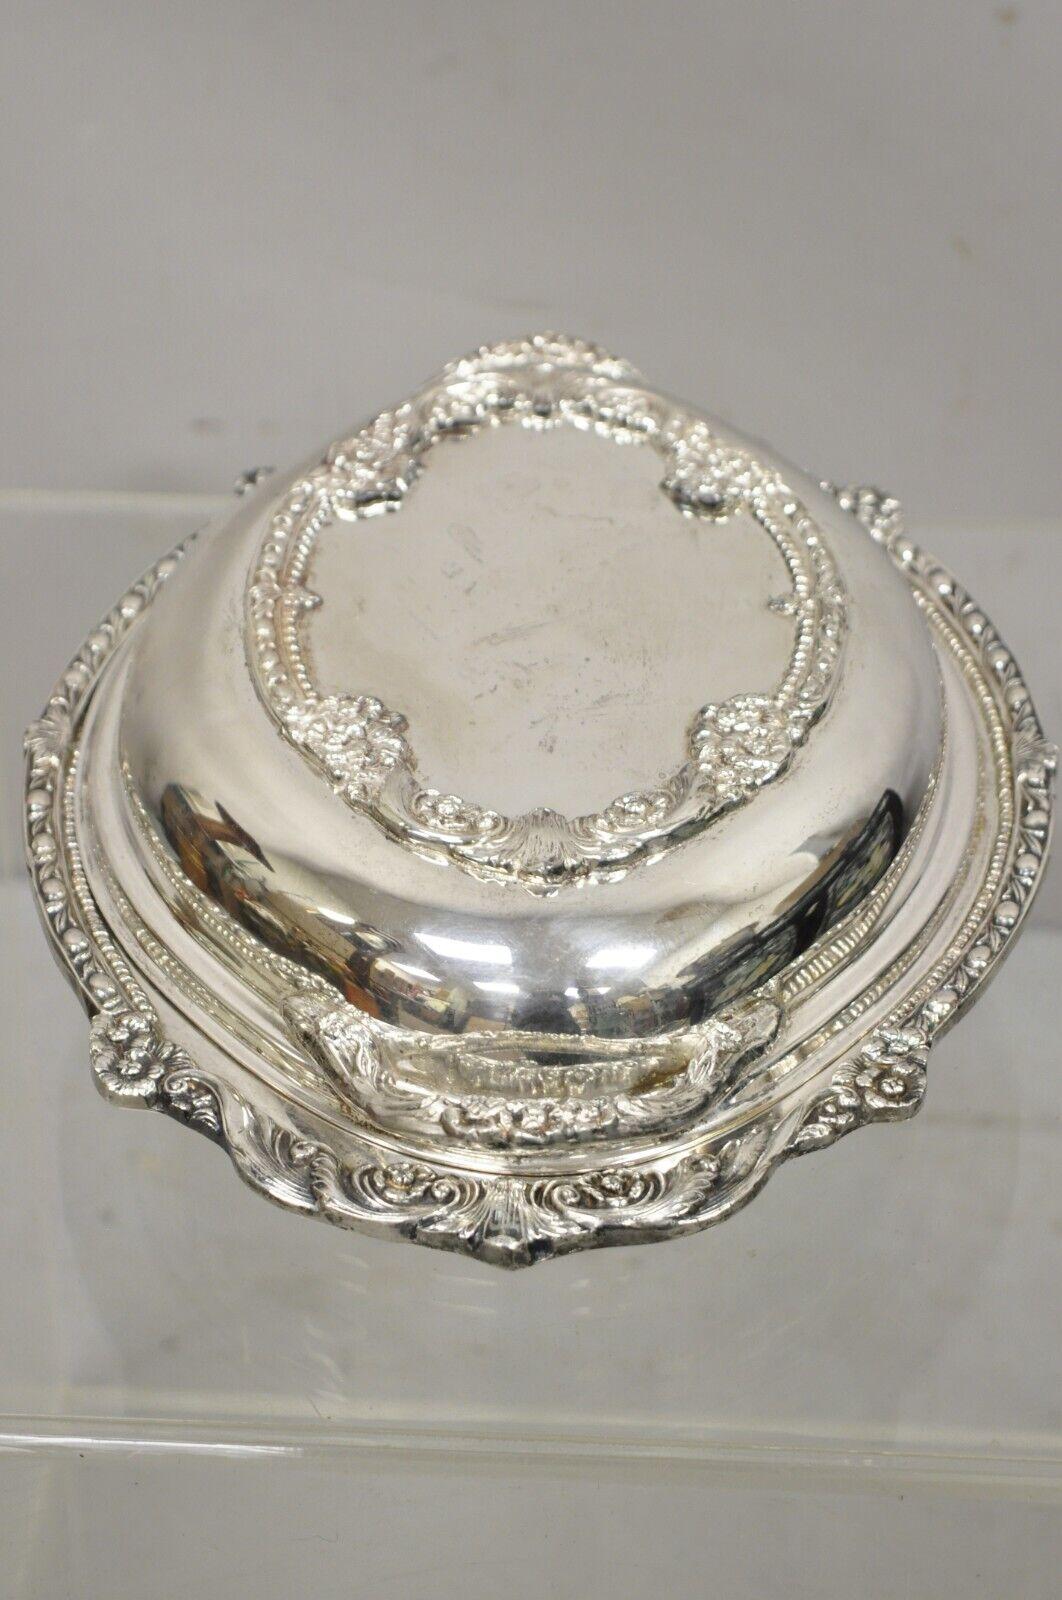 Vintage Silverplate Victorian Style Ornate Lidded Vegetable Serving Dish Platter In Good Condition For Sale In Philadelphia, PA